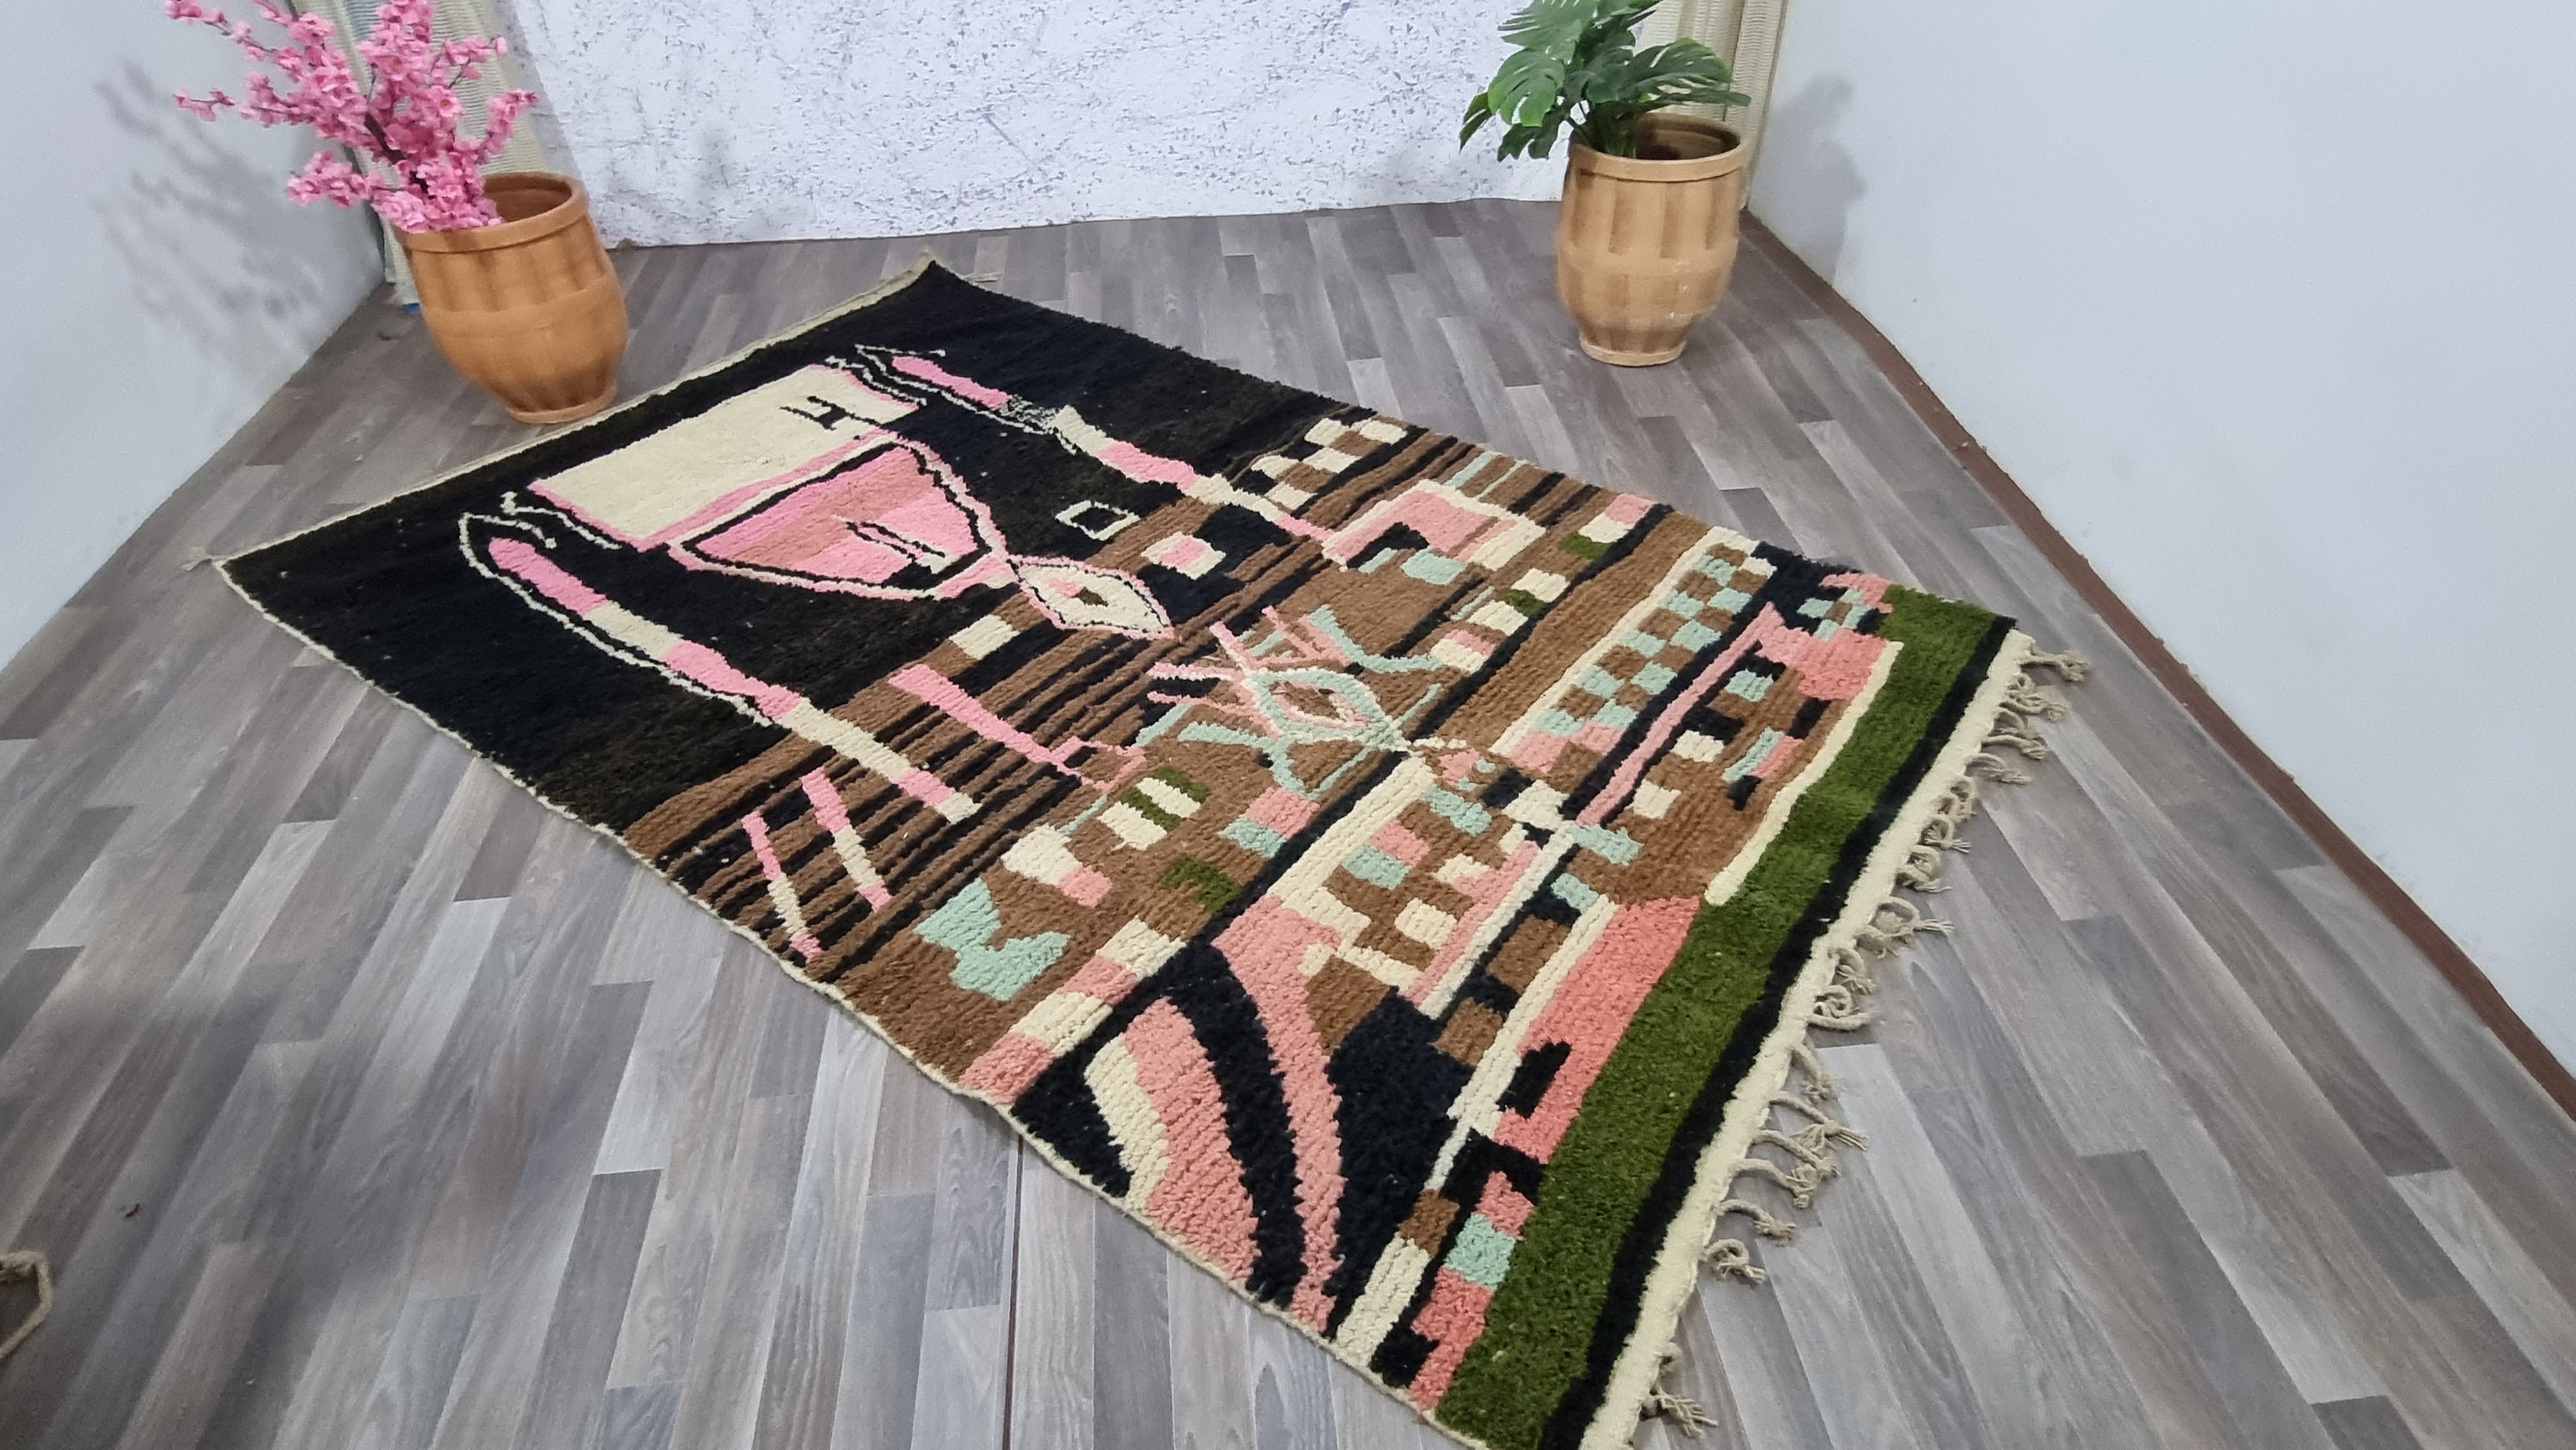 3d Squre Rug| Black Moroccan Custom Rug - Moroccan Woolen Carpet - New Azilal Rug - Beni Ourain Style - New Beni Ourain Rug - Berber Rug - Jordan Area Rug